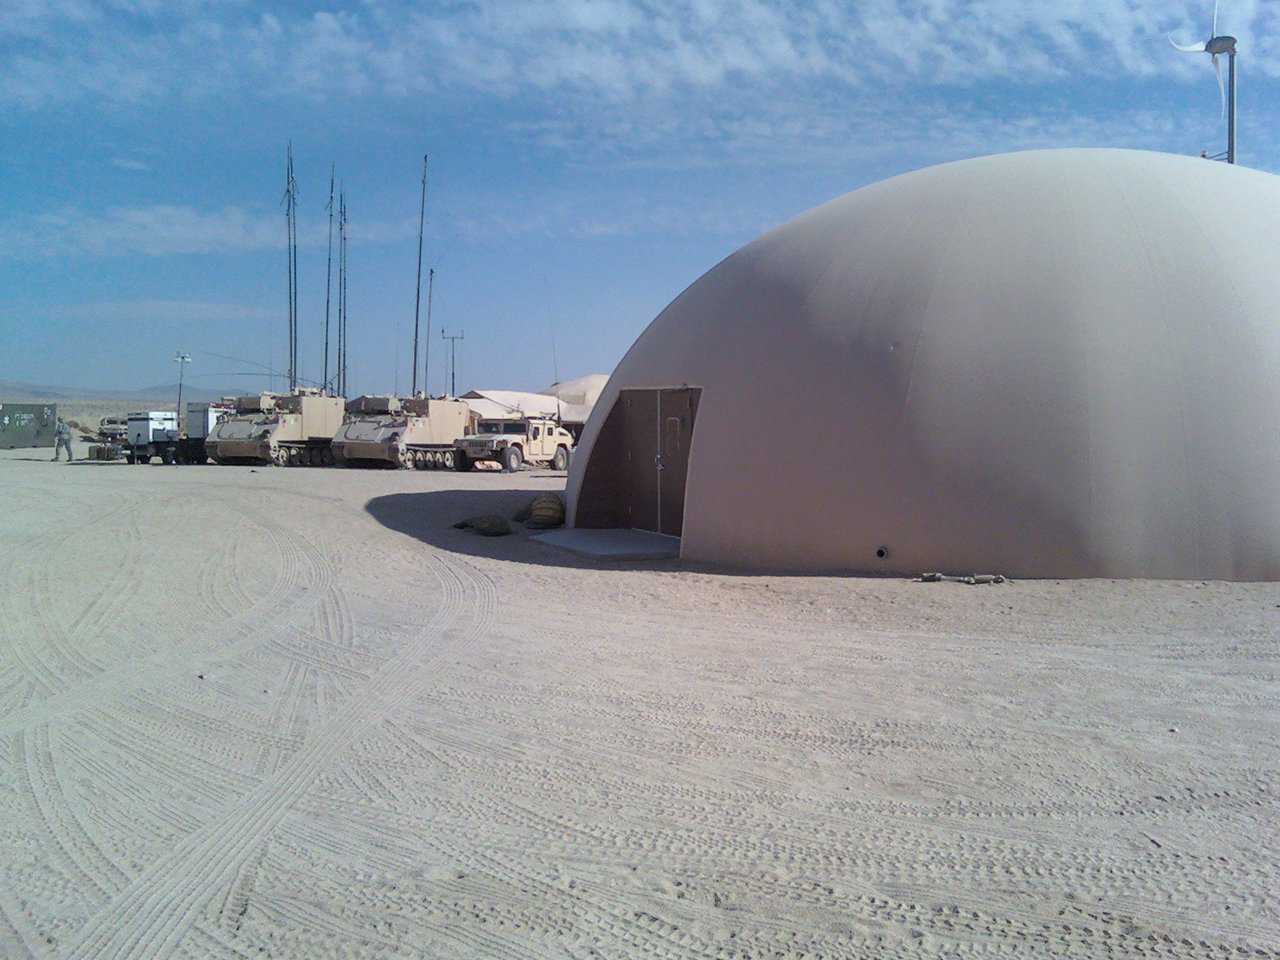 The second staging dome has a 75’ diameter.